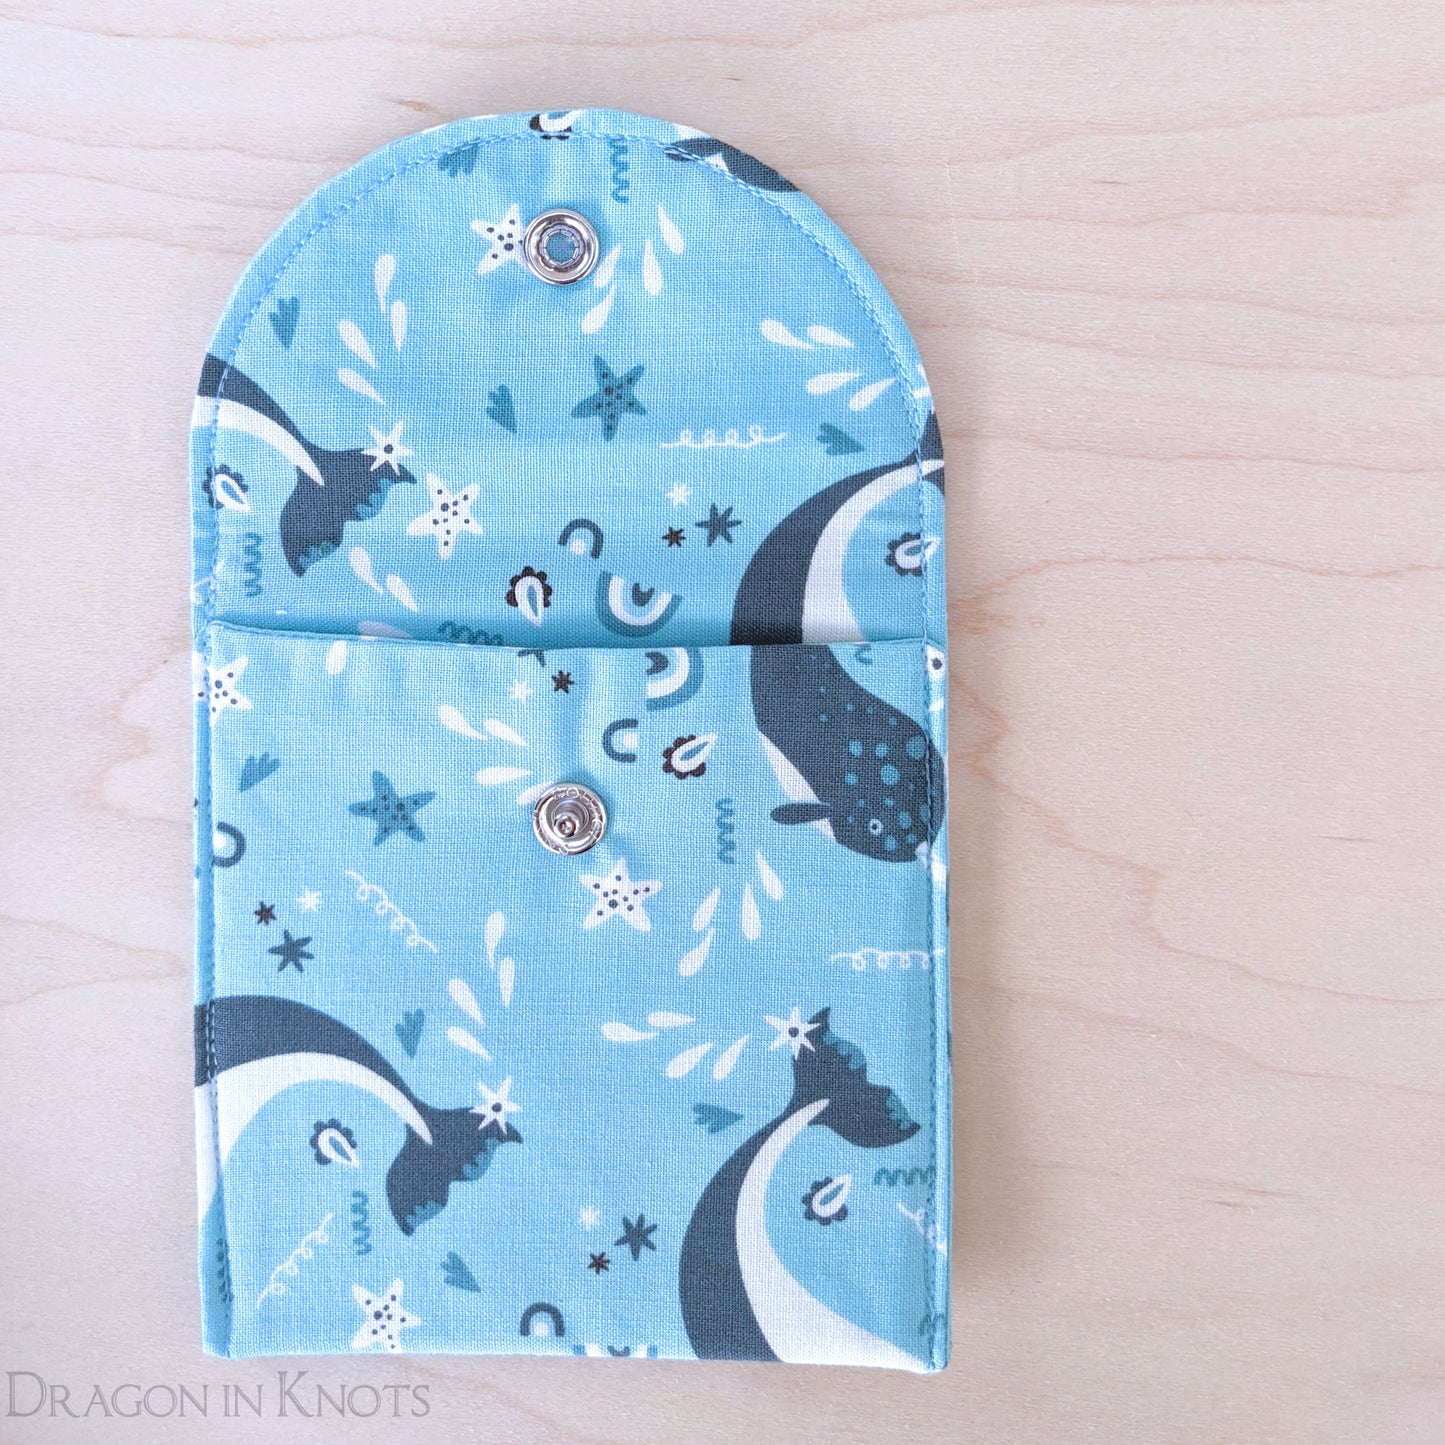 Narwhal 4" Accessory Pouch - Dragon in Knots handmade